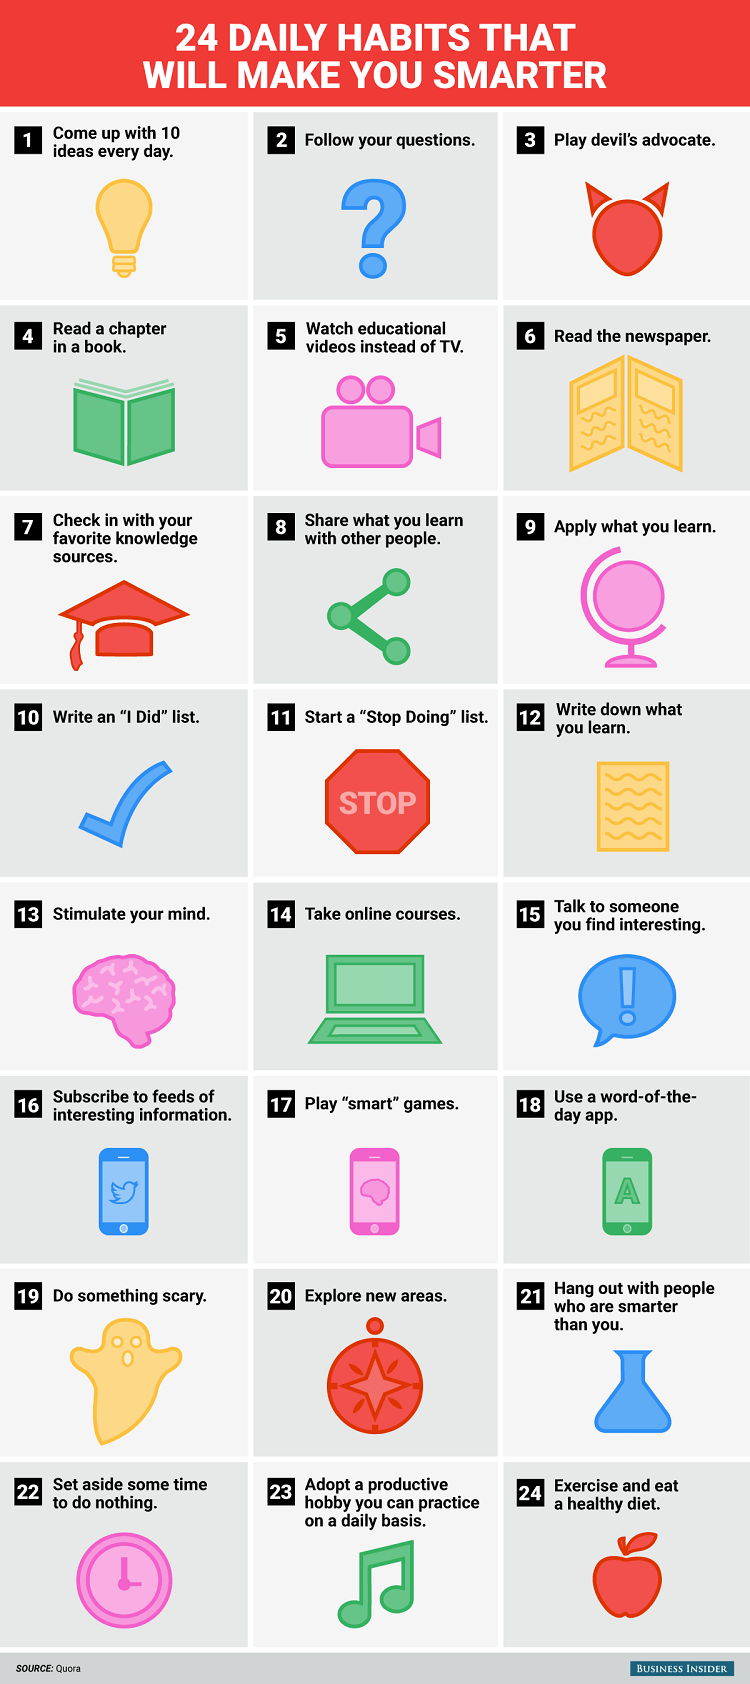 24-daily-things-to-make-you-smarter